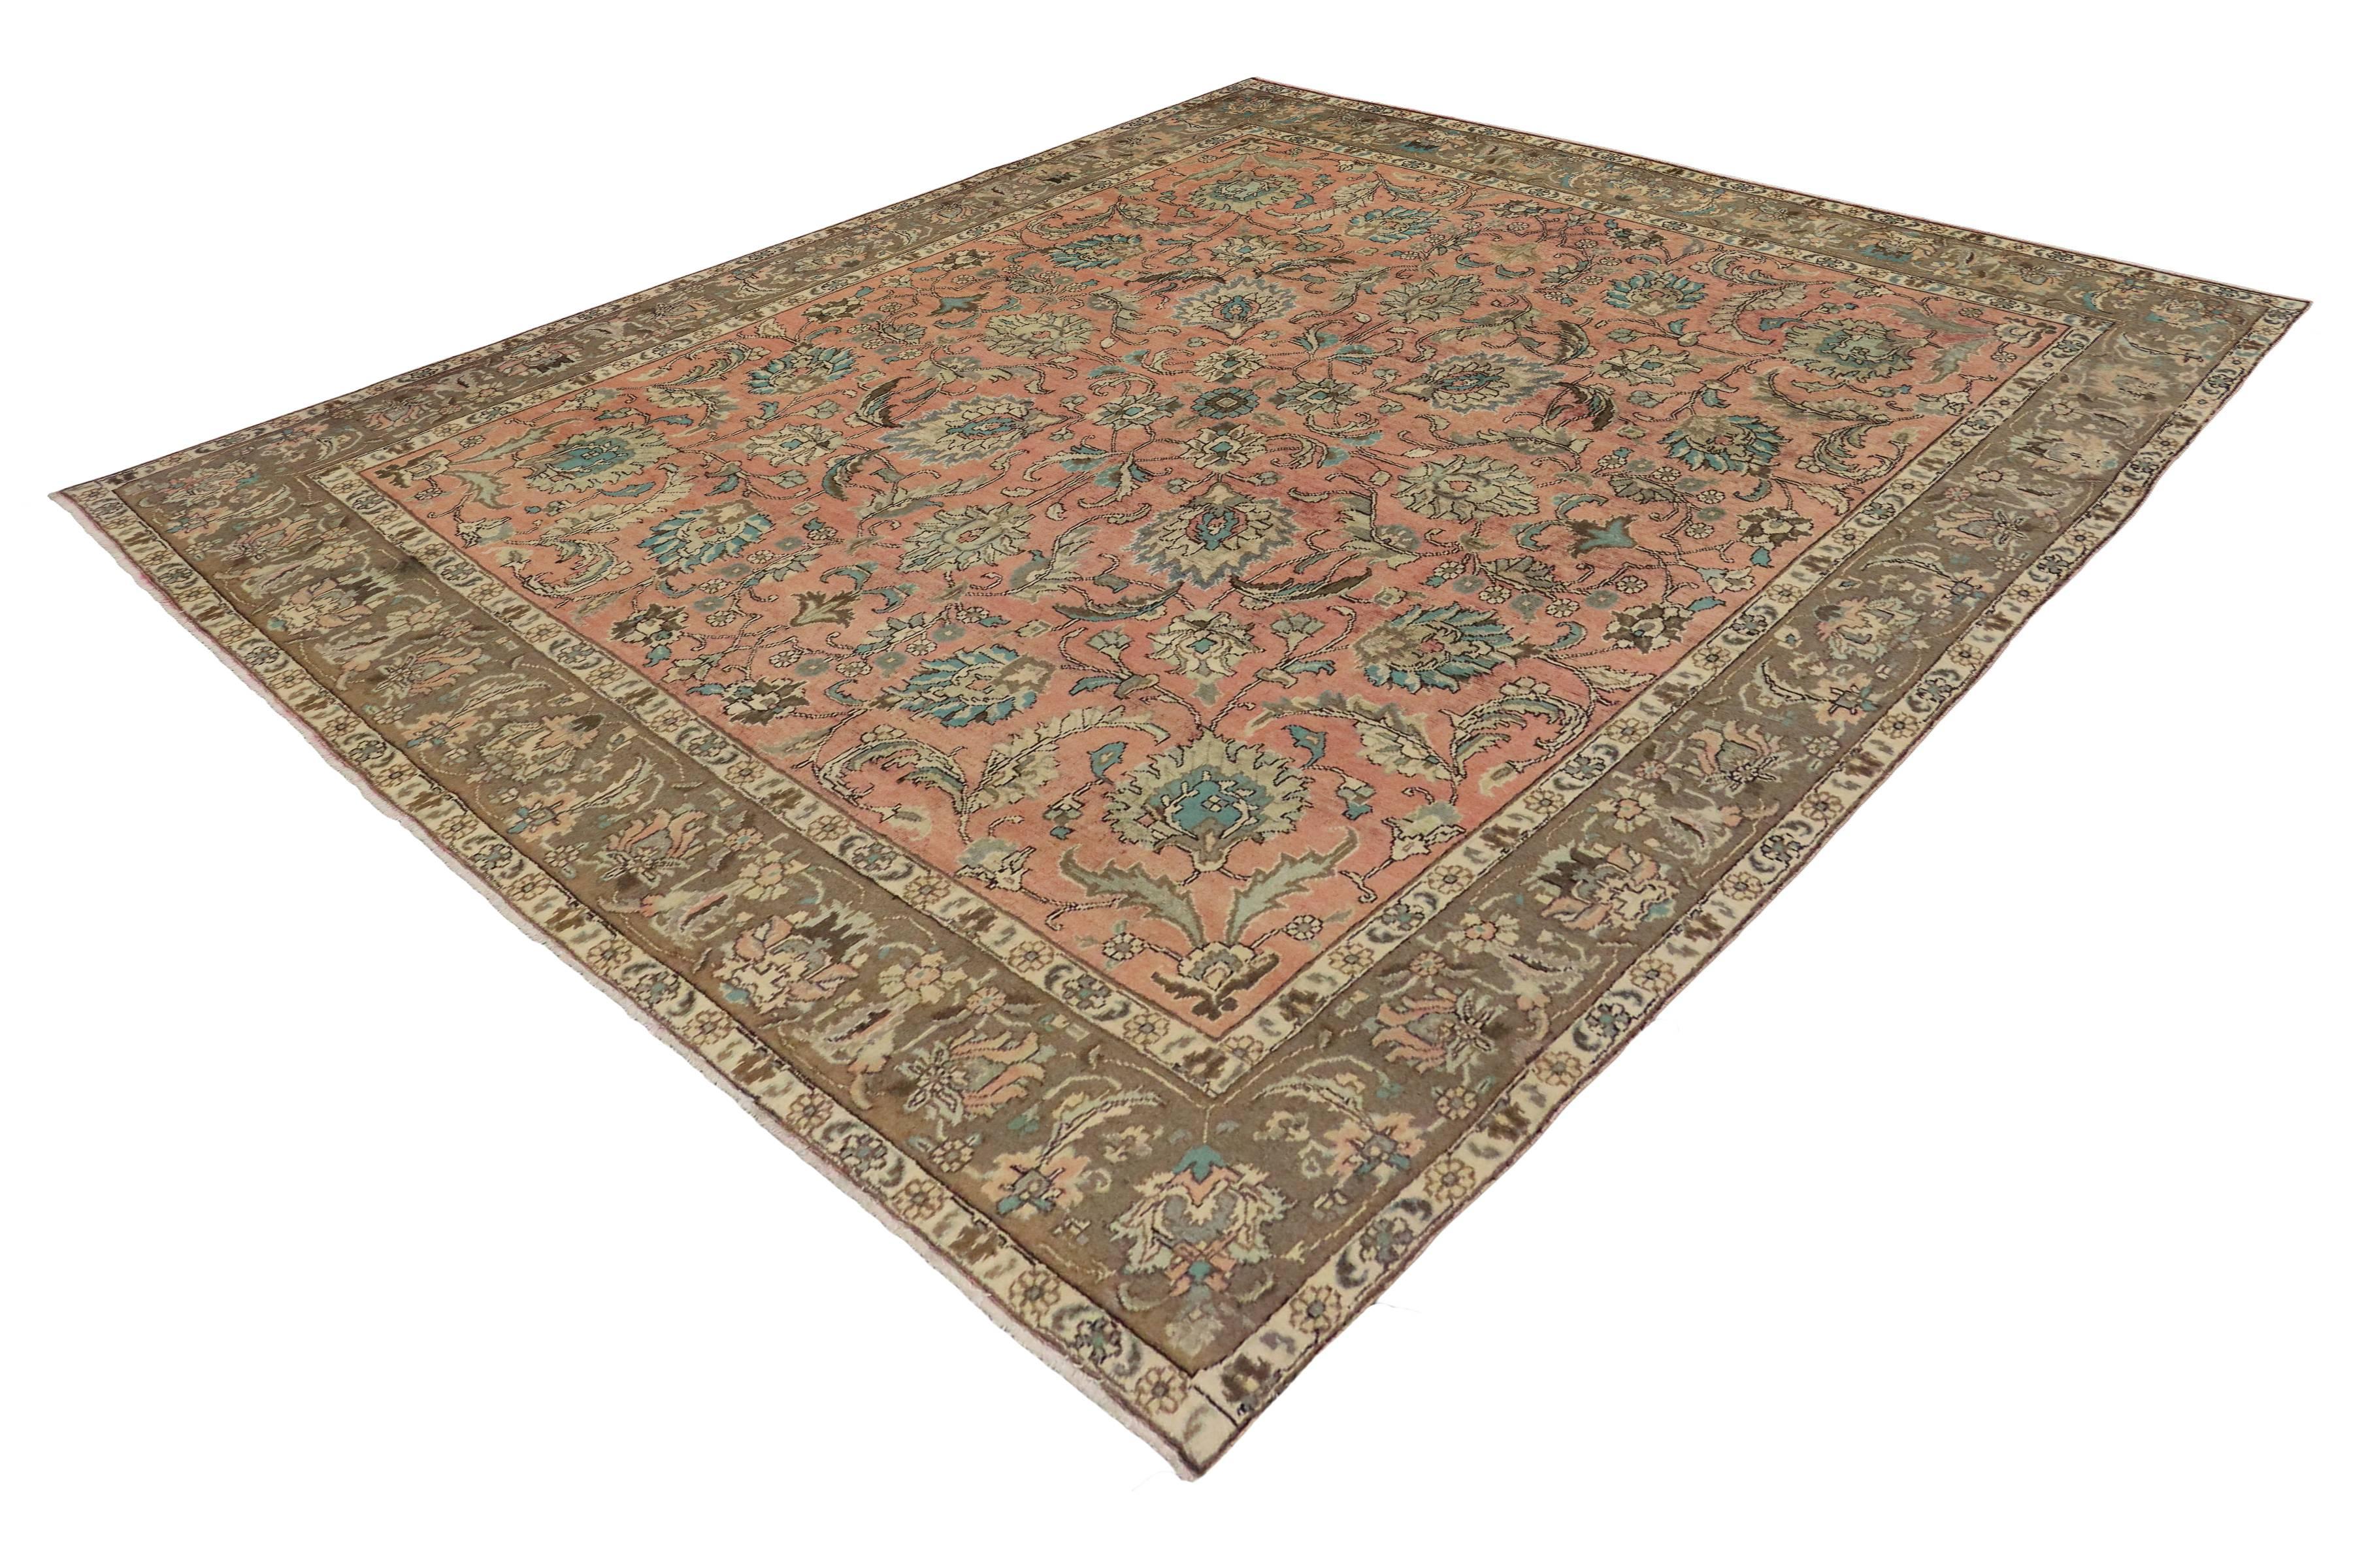 Hand-Knotted Vintage Persian Tabriz Rug with Traditional Style in Light Colors, Square Rug